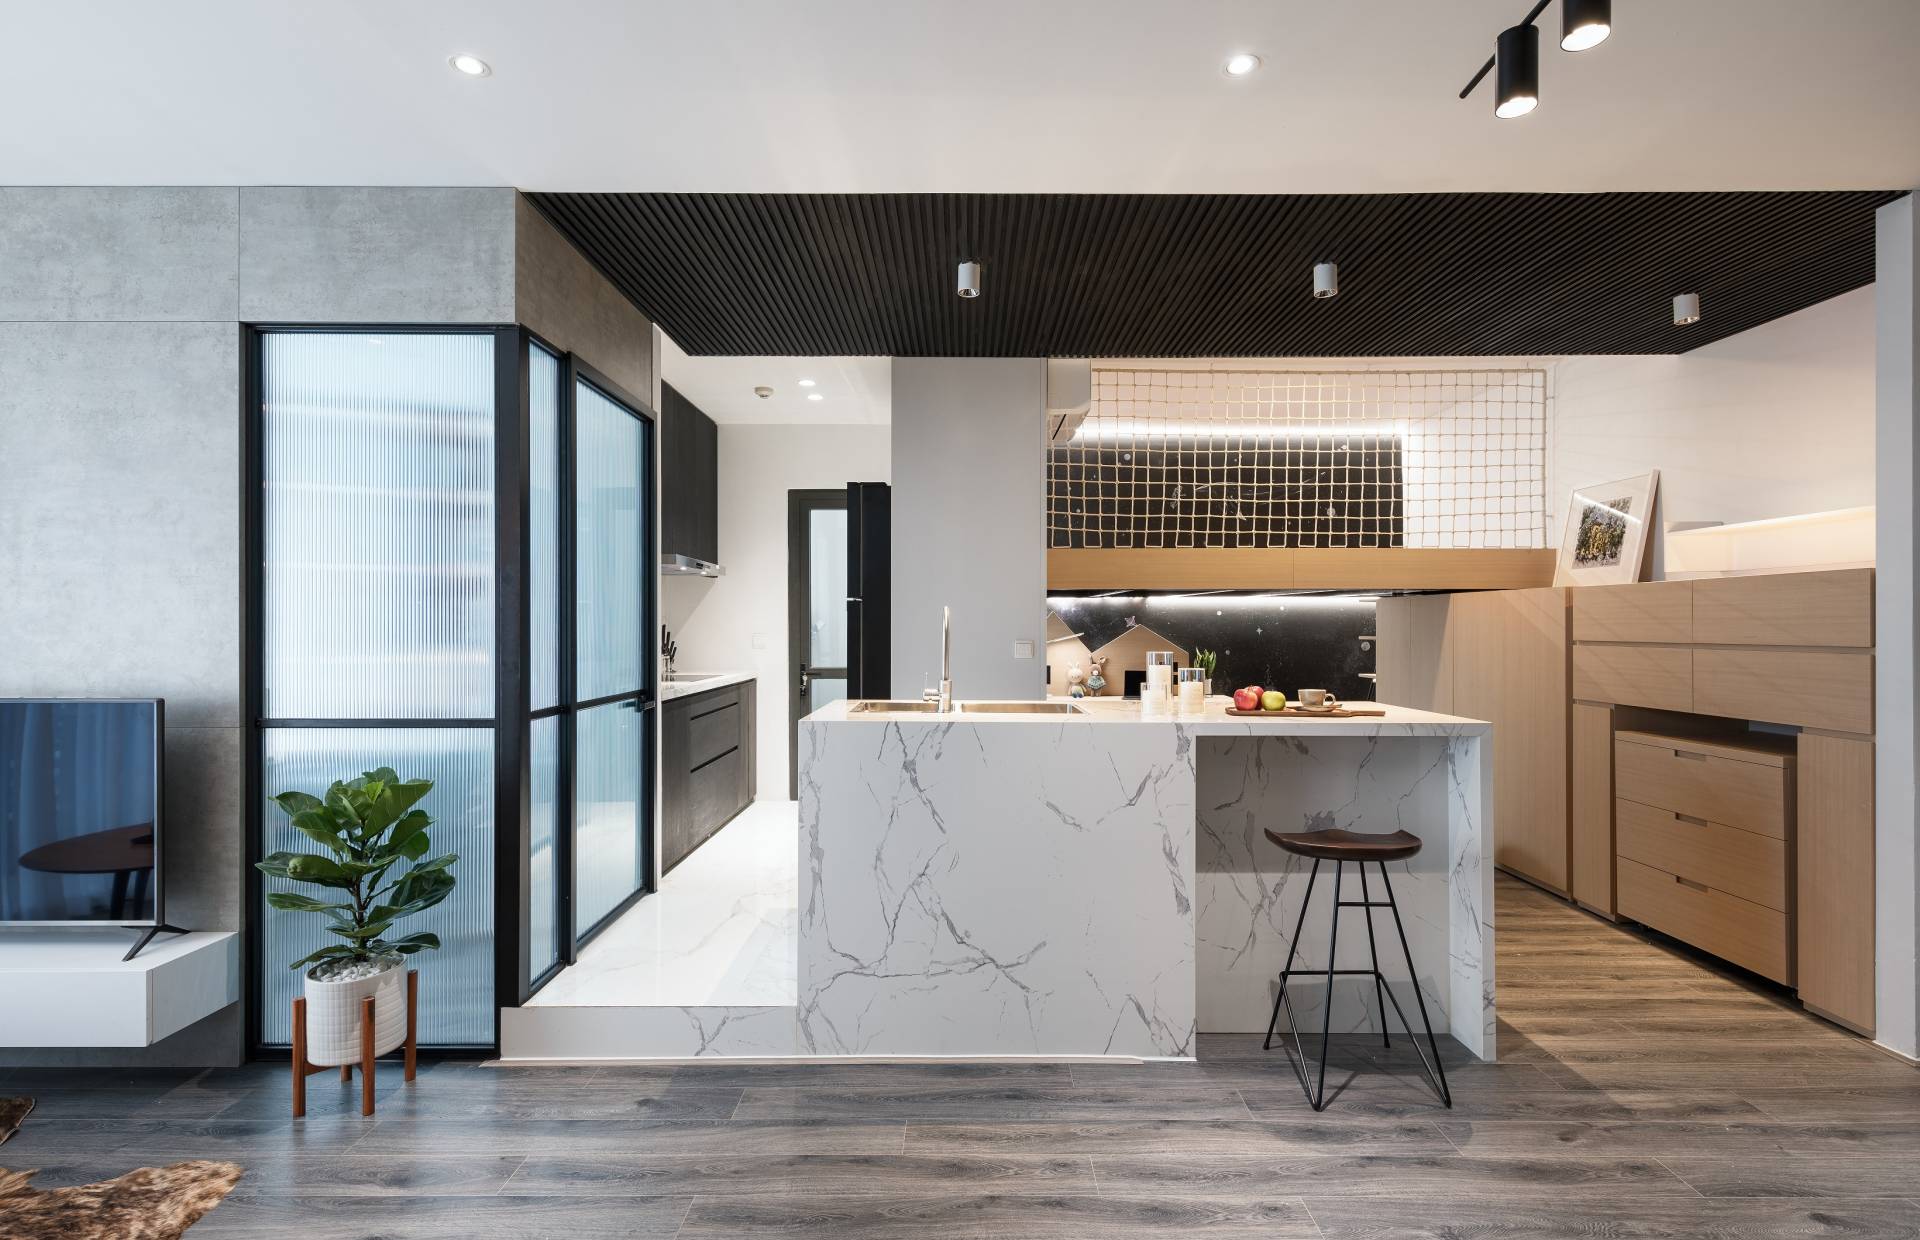 The kitchen area is airy. Its floor is raised up. The stone material is used in sync with the bar, both helping to divide and create a connection between spaces.